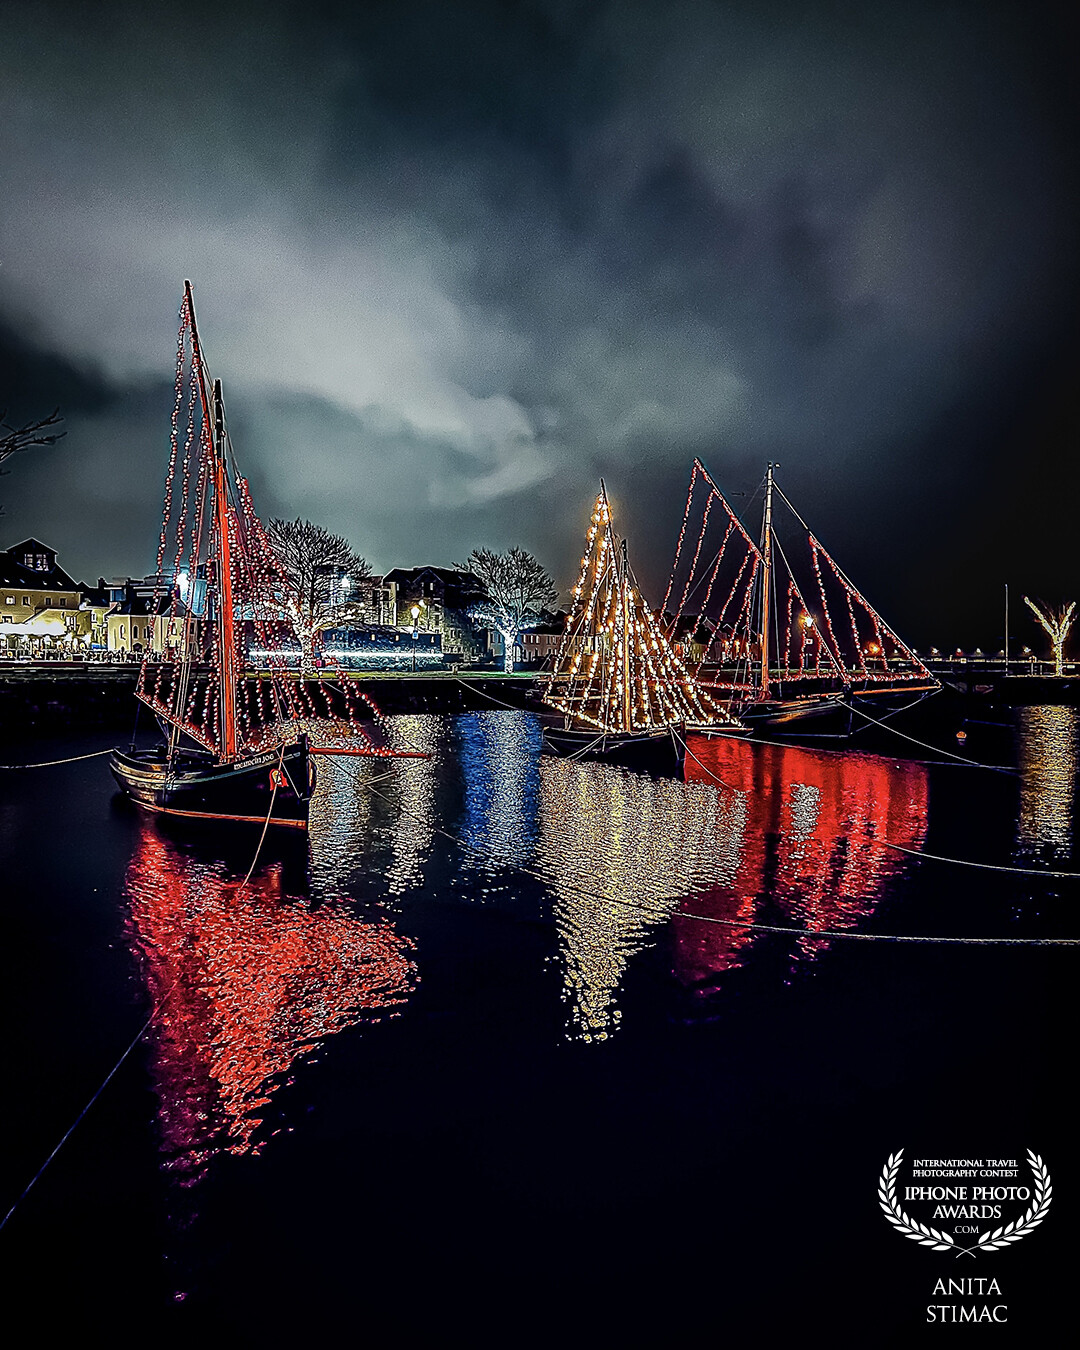 The traditional boat fleet in Galway takes pride in lighting their rigs in the city's basin for special occasions.